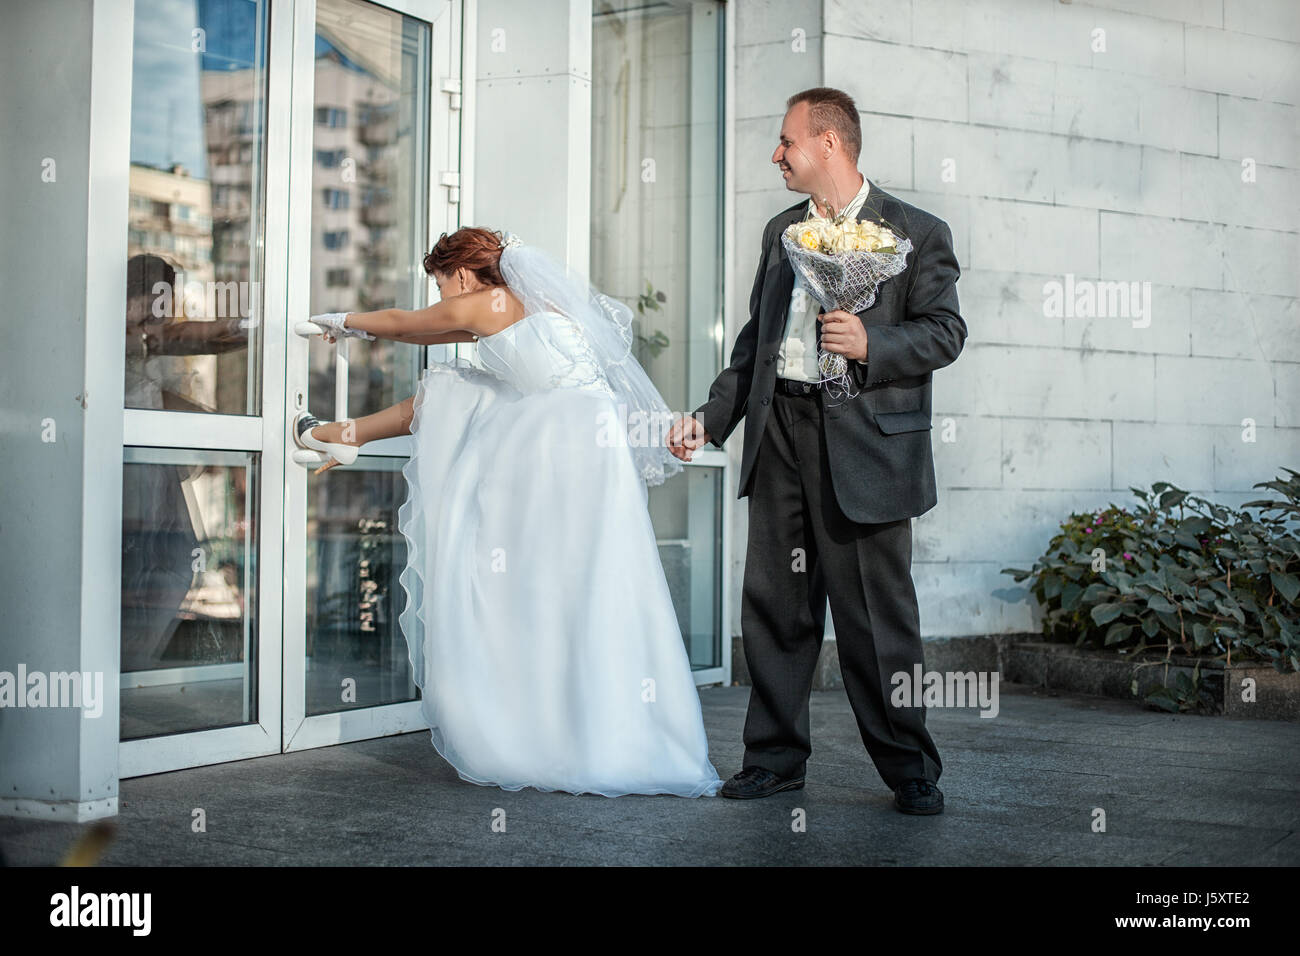 The bride and groom came to the wedding and want to go. Stock Photo